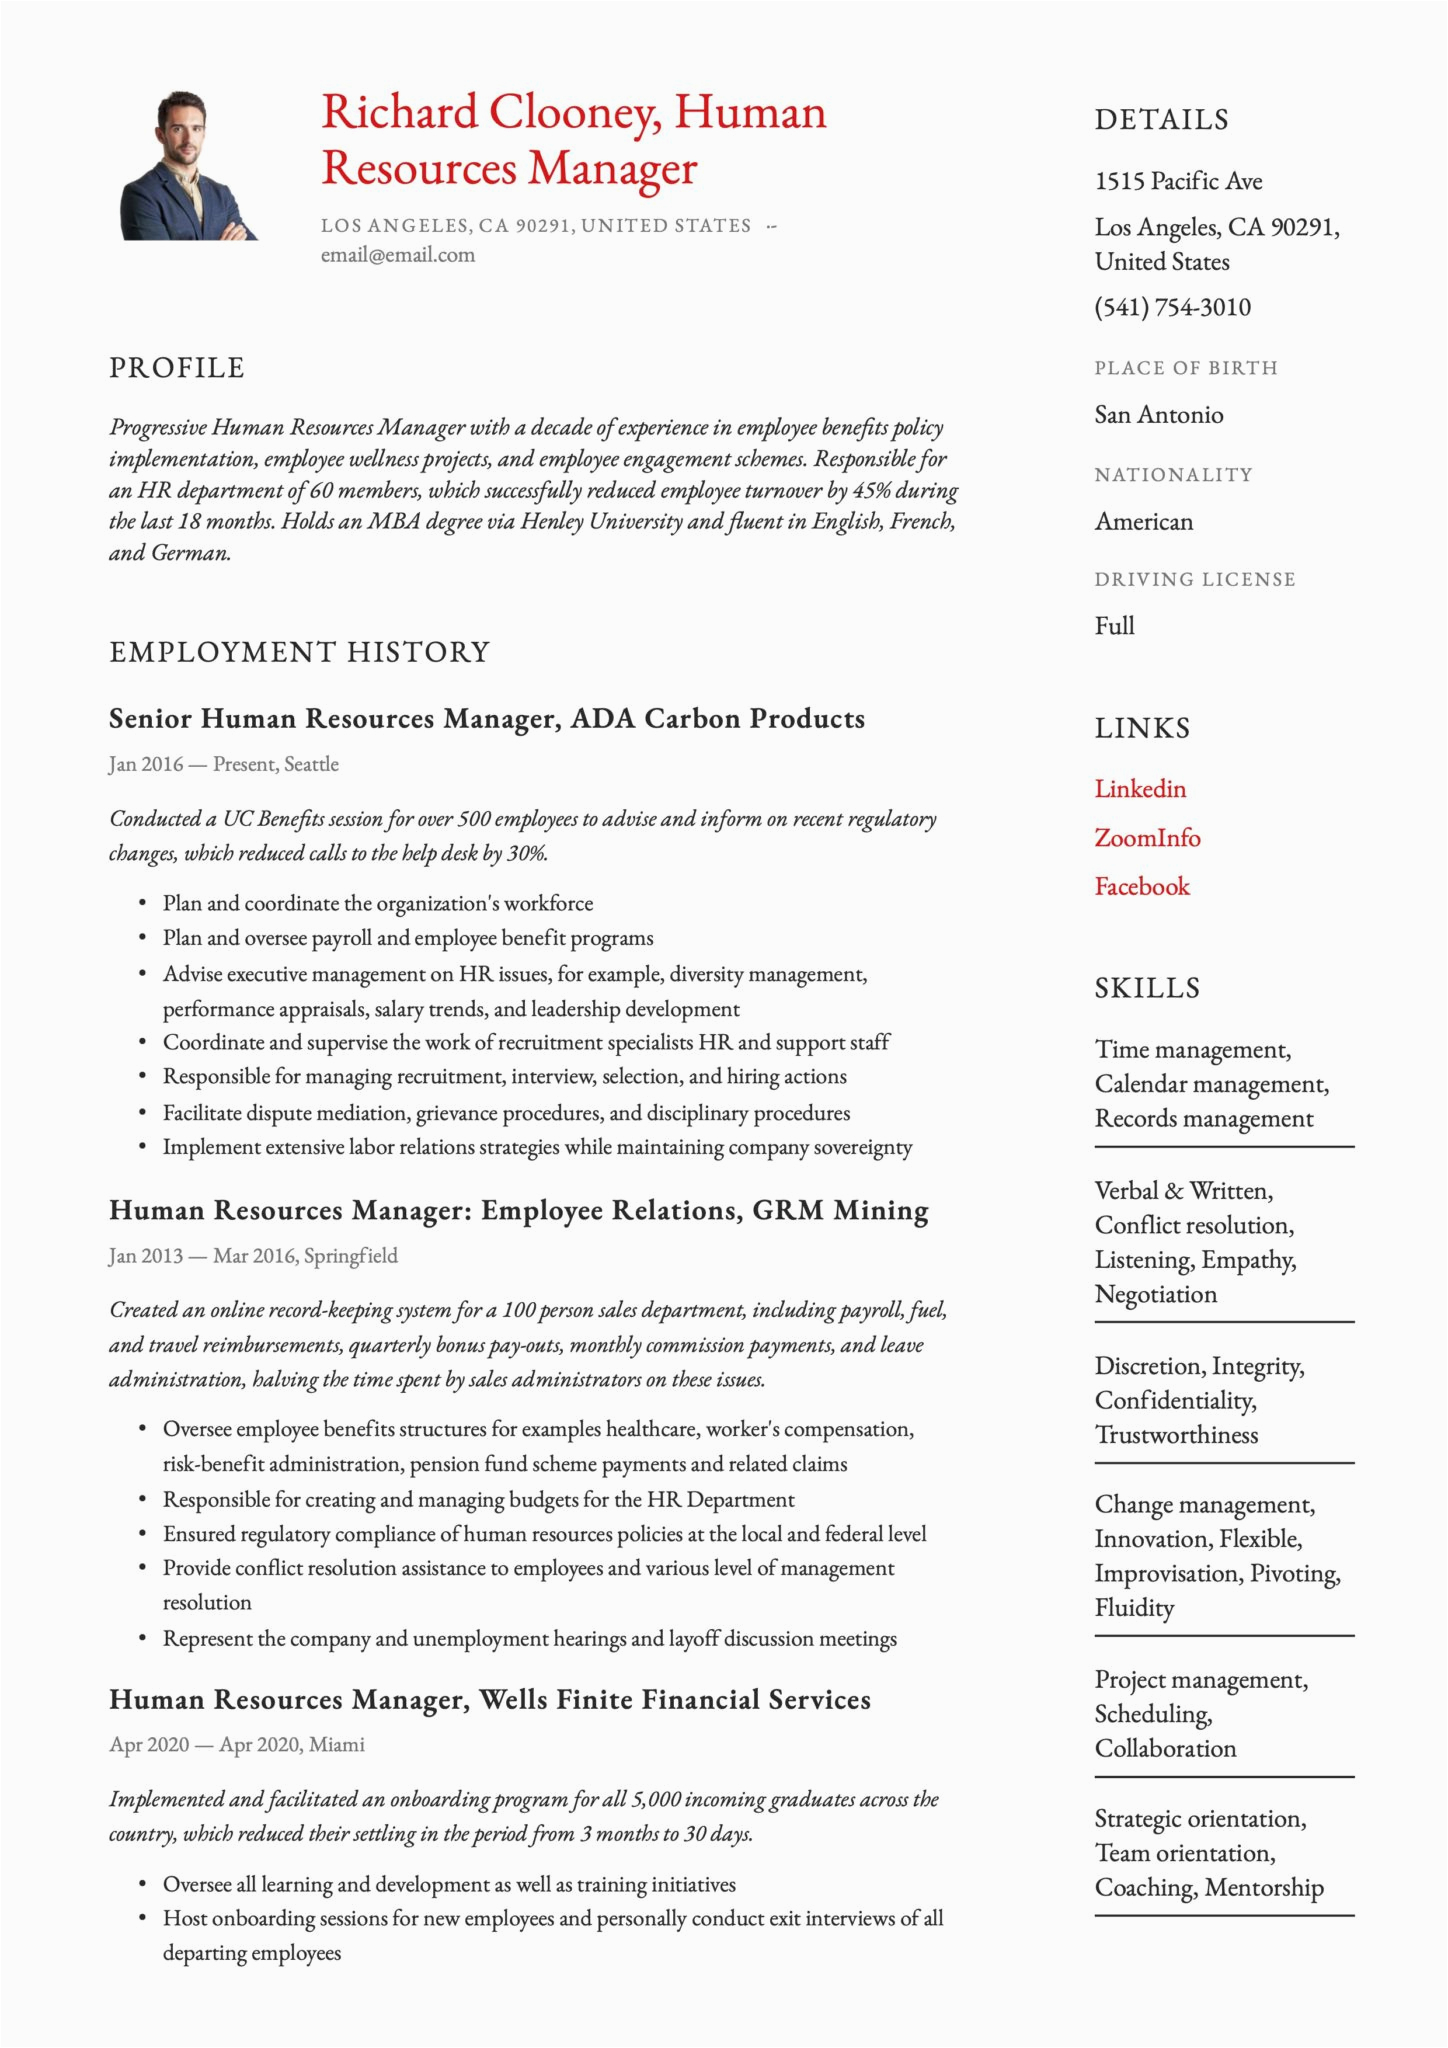 Resume Sample for A Human Resource 17 Human Resources Manager Resumes & Guide